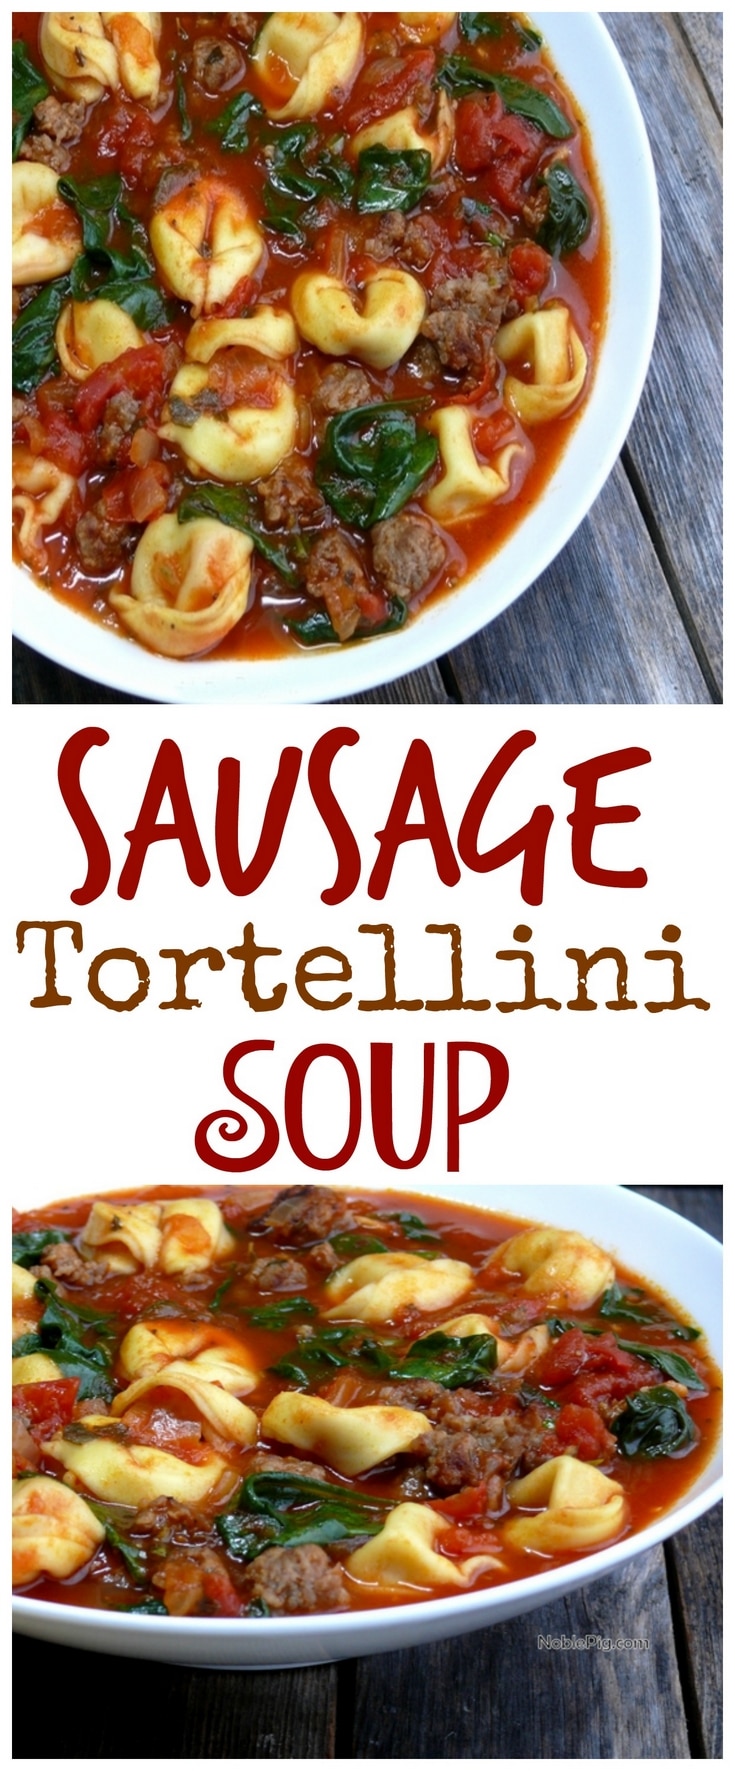 Video + Recipe: A quick, easy and delicious dinner! This Sausage Tortellini Soup is a family favorite and the perfect weeknight meal. Enjoy with a hunk of crusty bread from NoblePig.com. via @cmpollak1